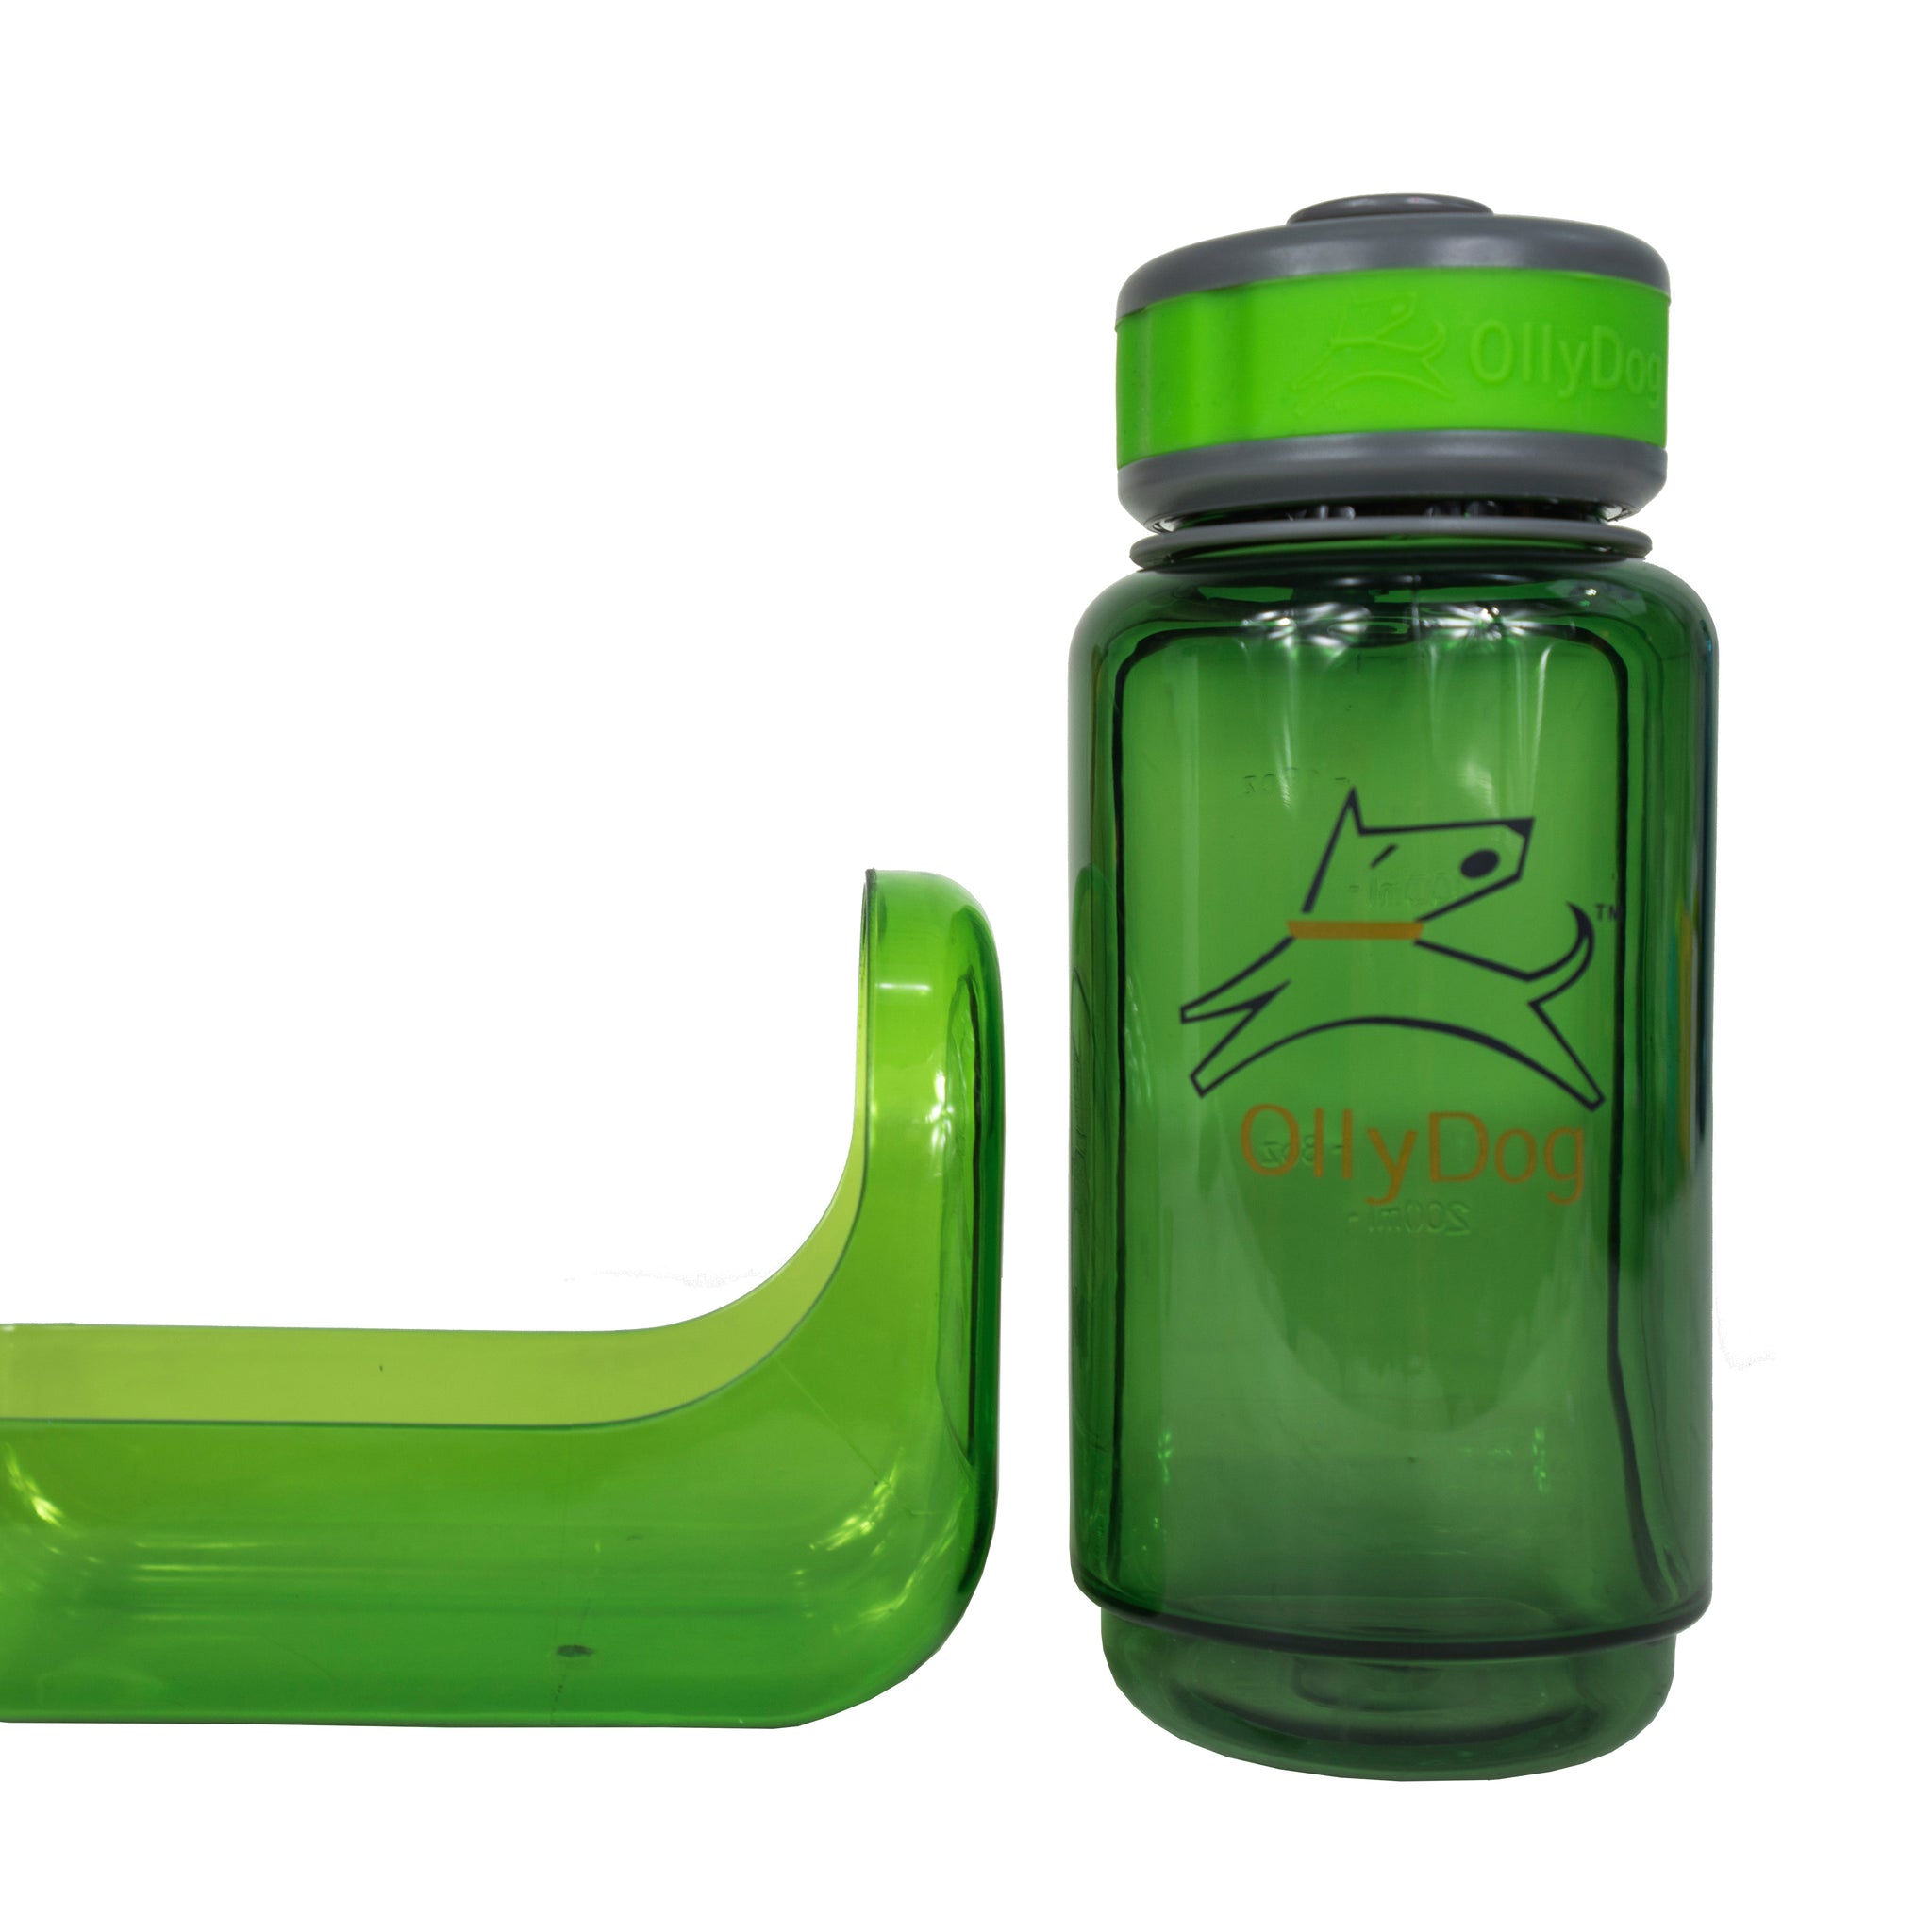 OllyBottle in Grass | Water Sharing System